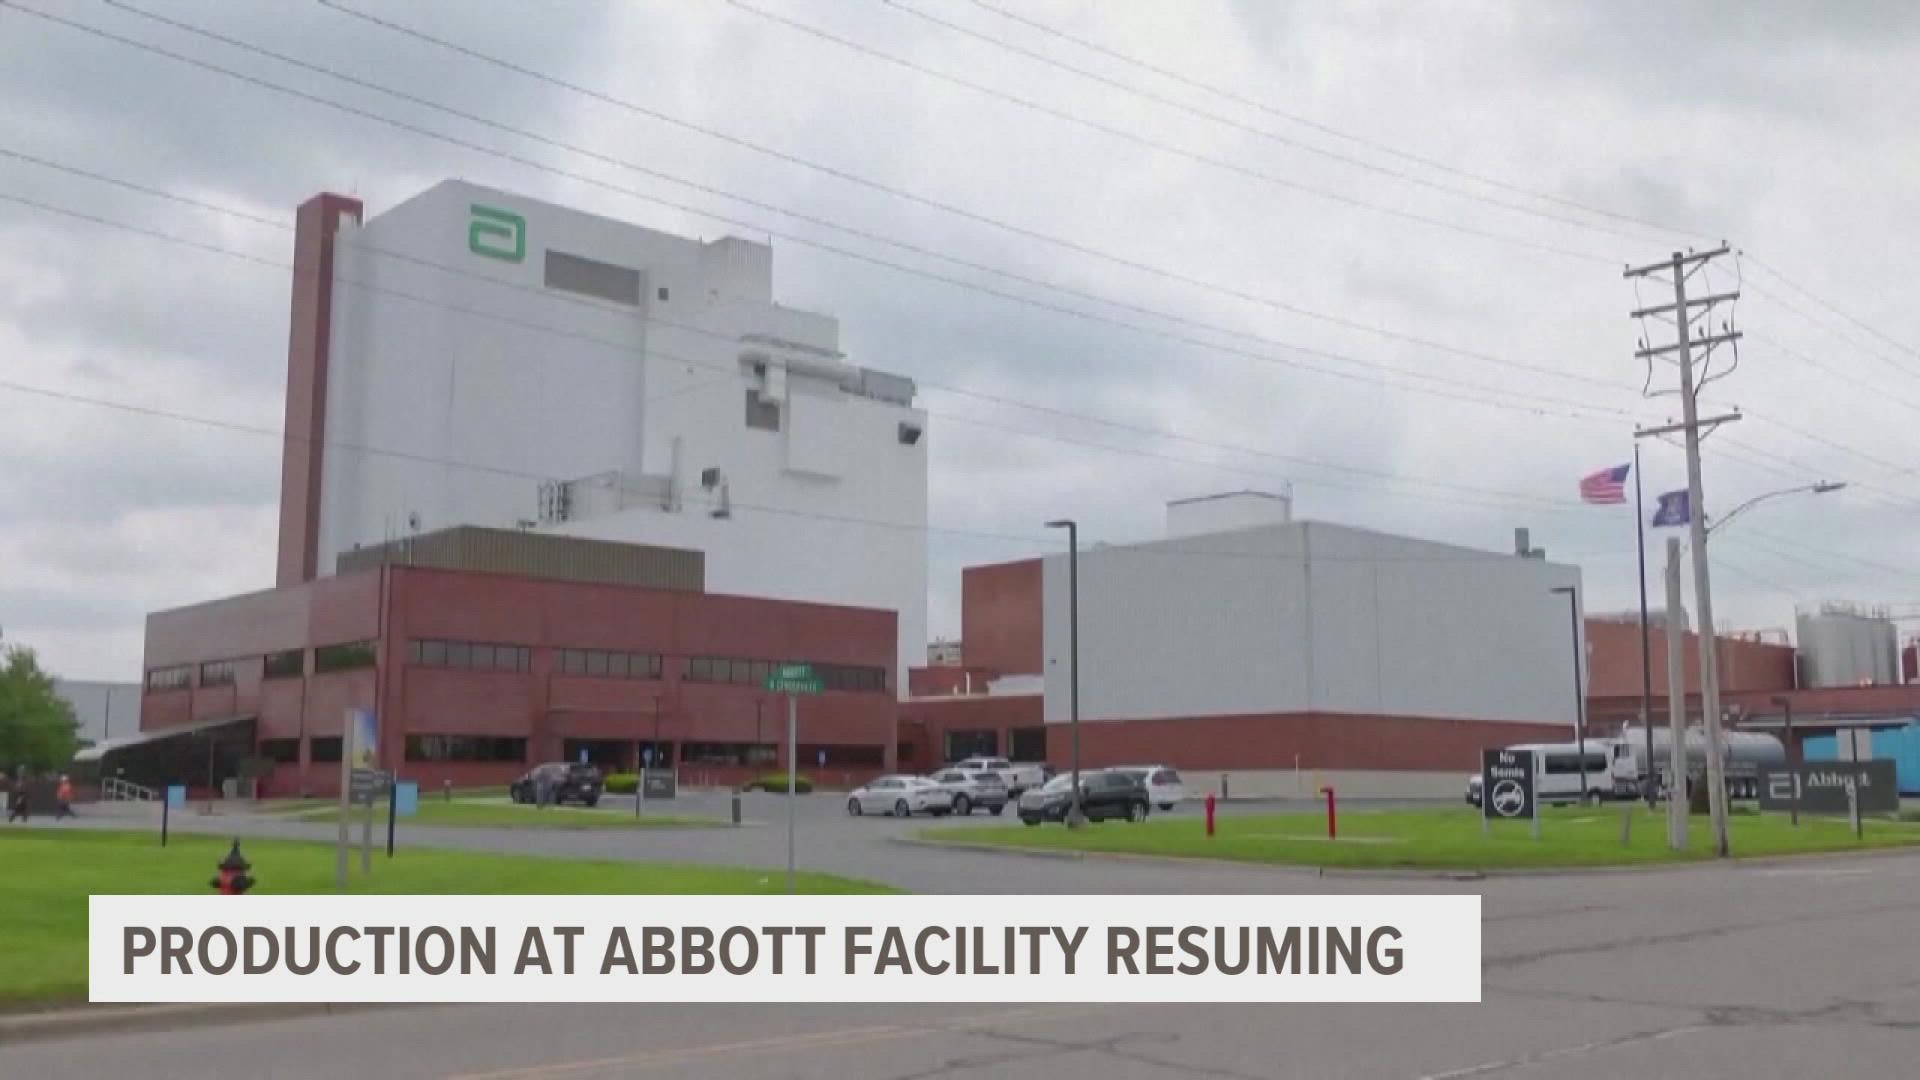 Abbott is one of just four companies that produce 90% of U.S. formula. Its shutdown in February over contamination contributed to a national shortage.